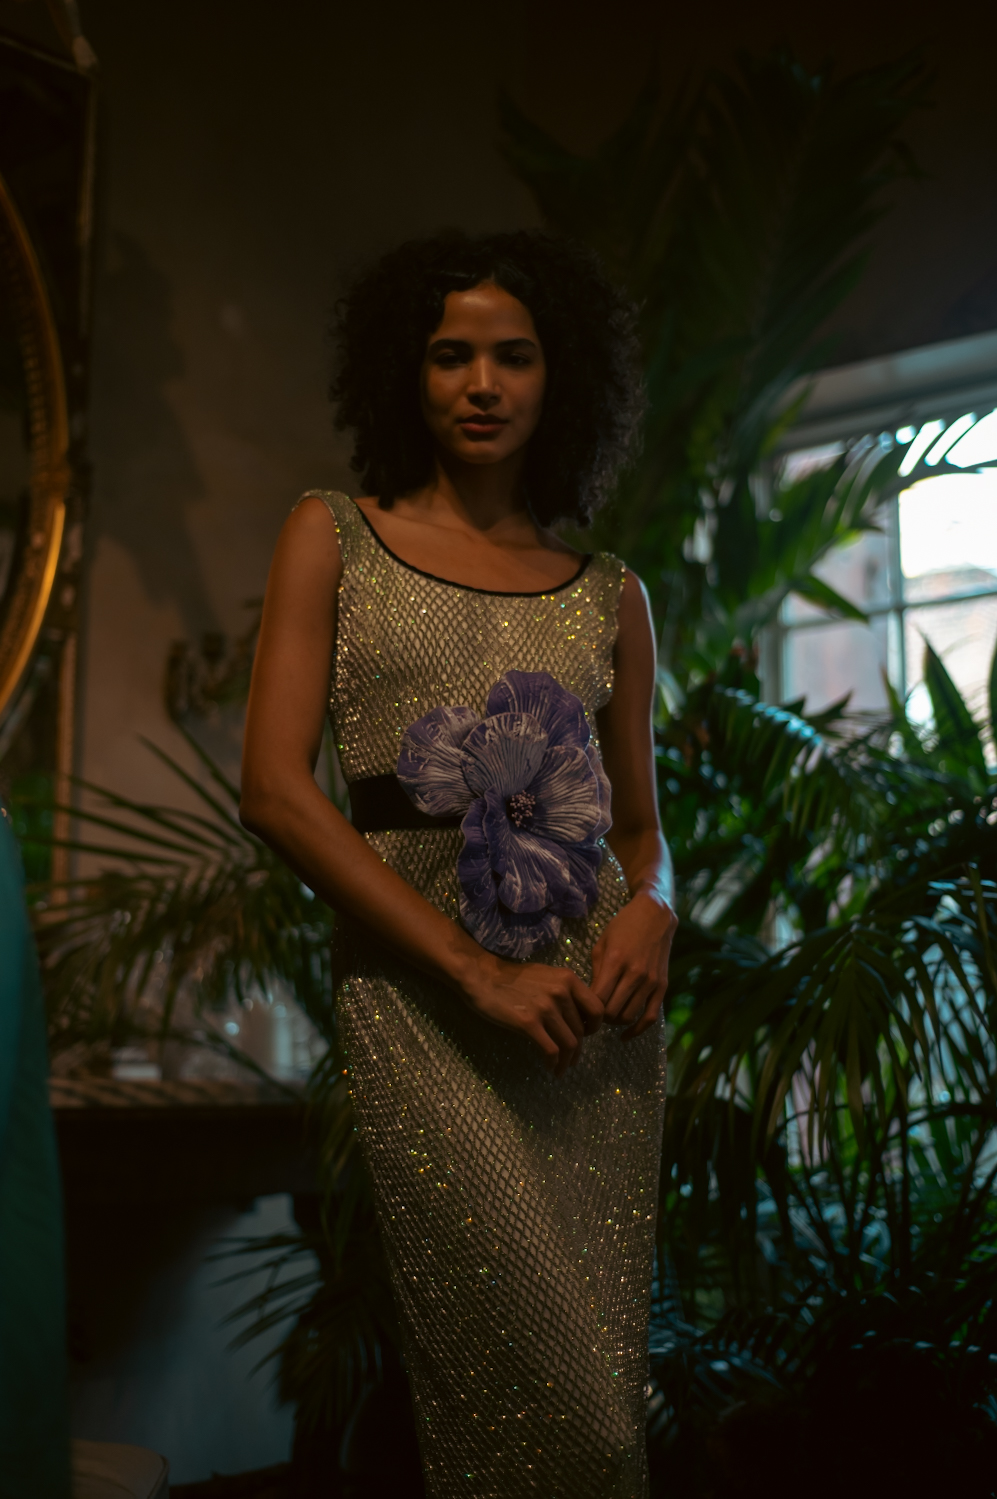 A model wearing a white, fishnet-patterned dress with green sequins, holding a purple flower.